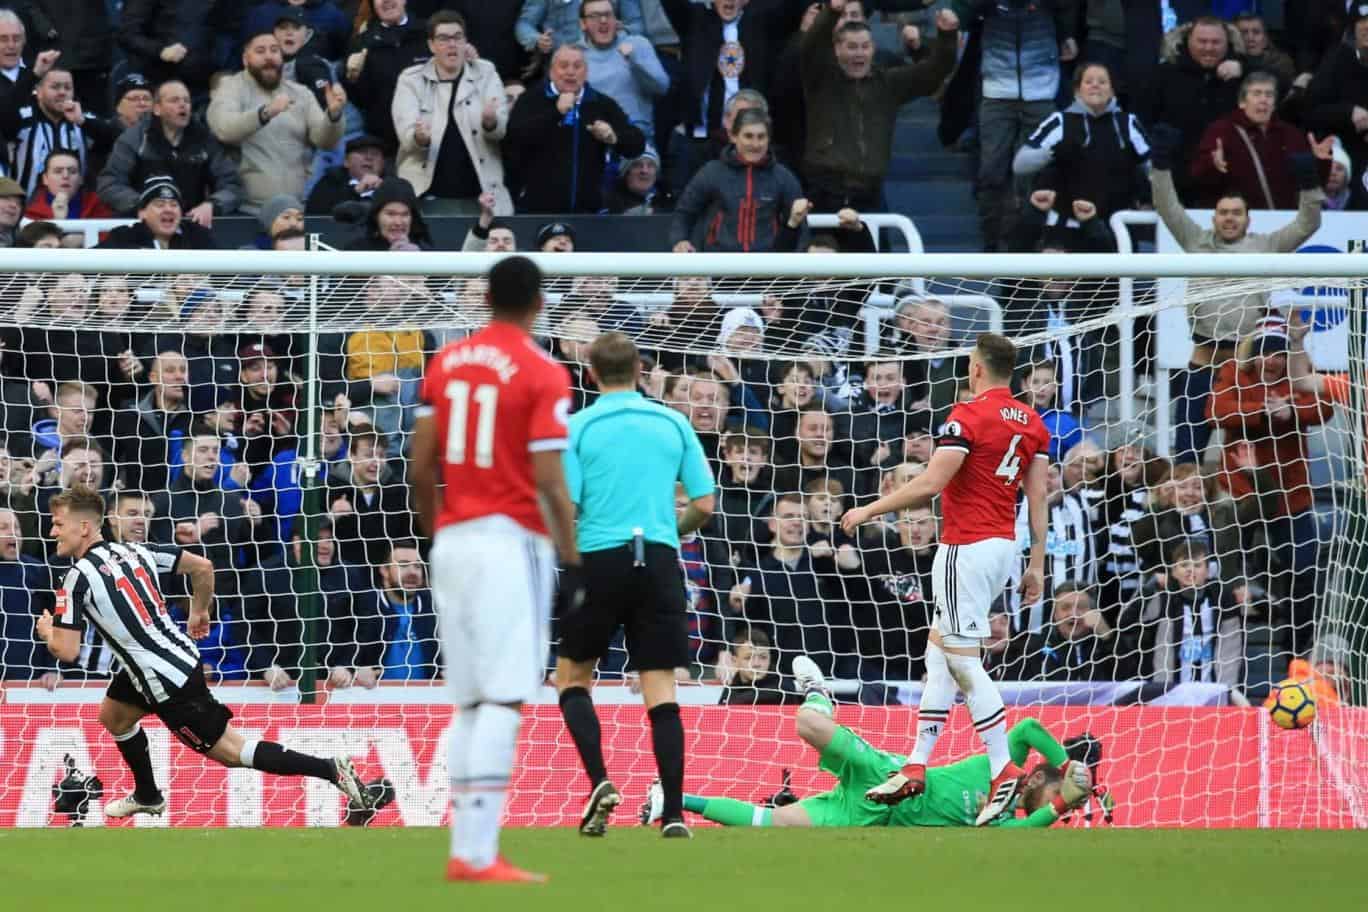 newcastle 1-0 manchester united